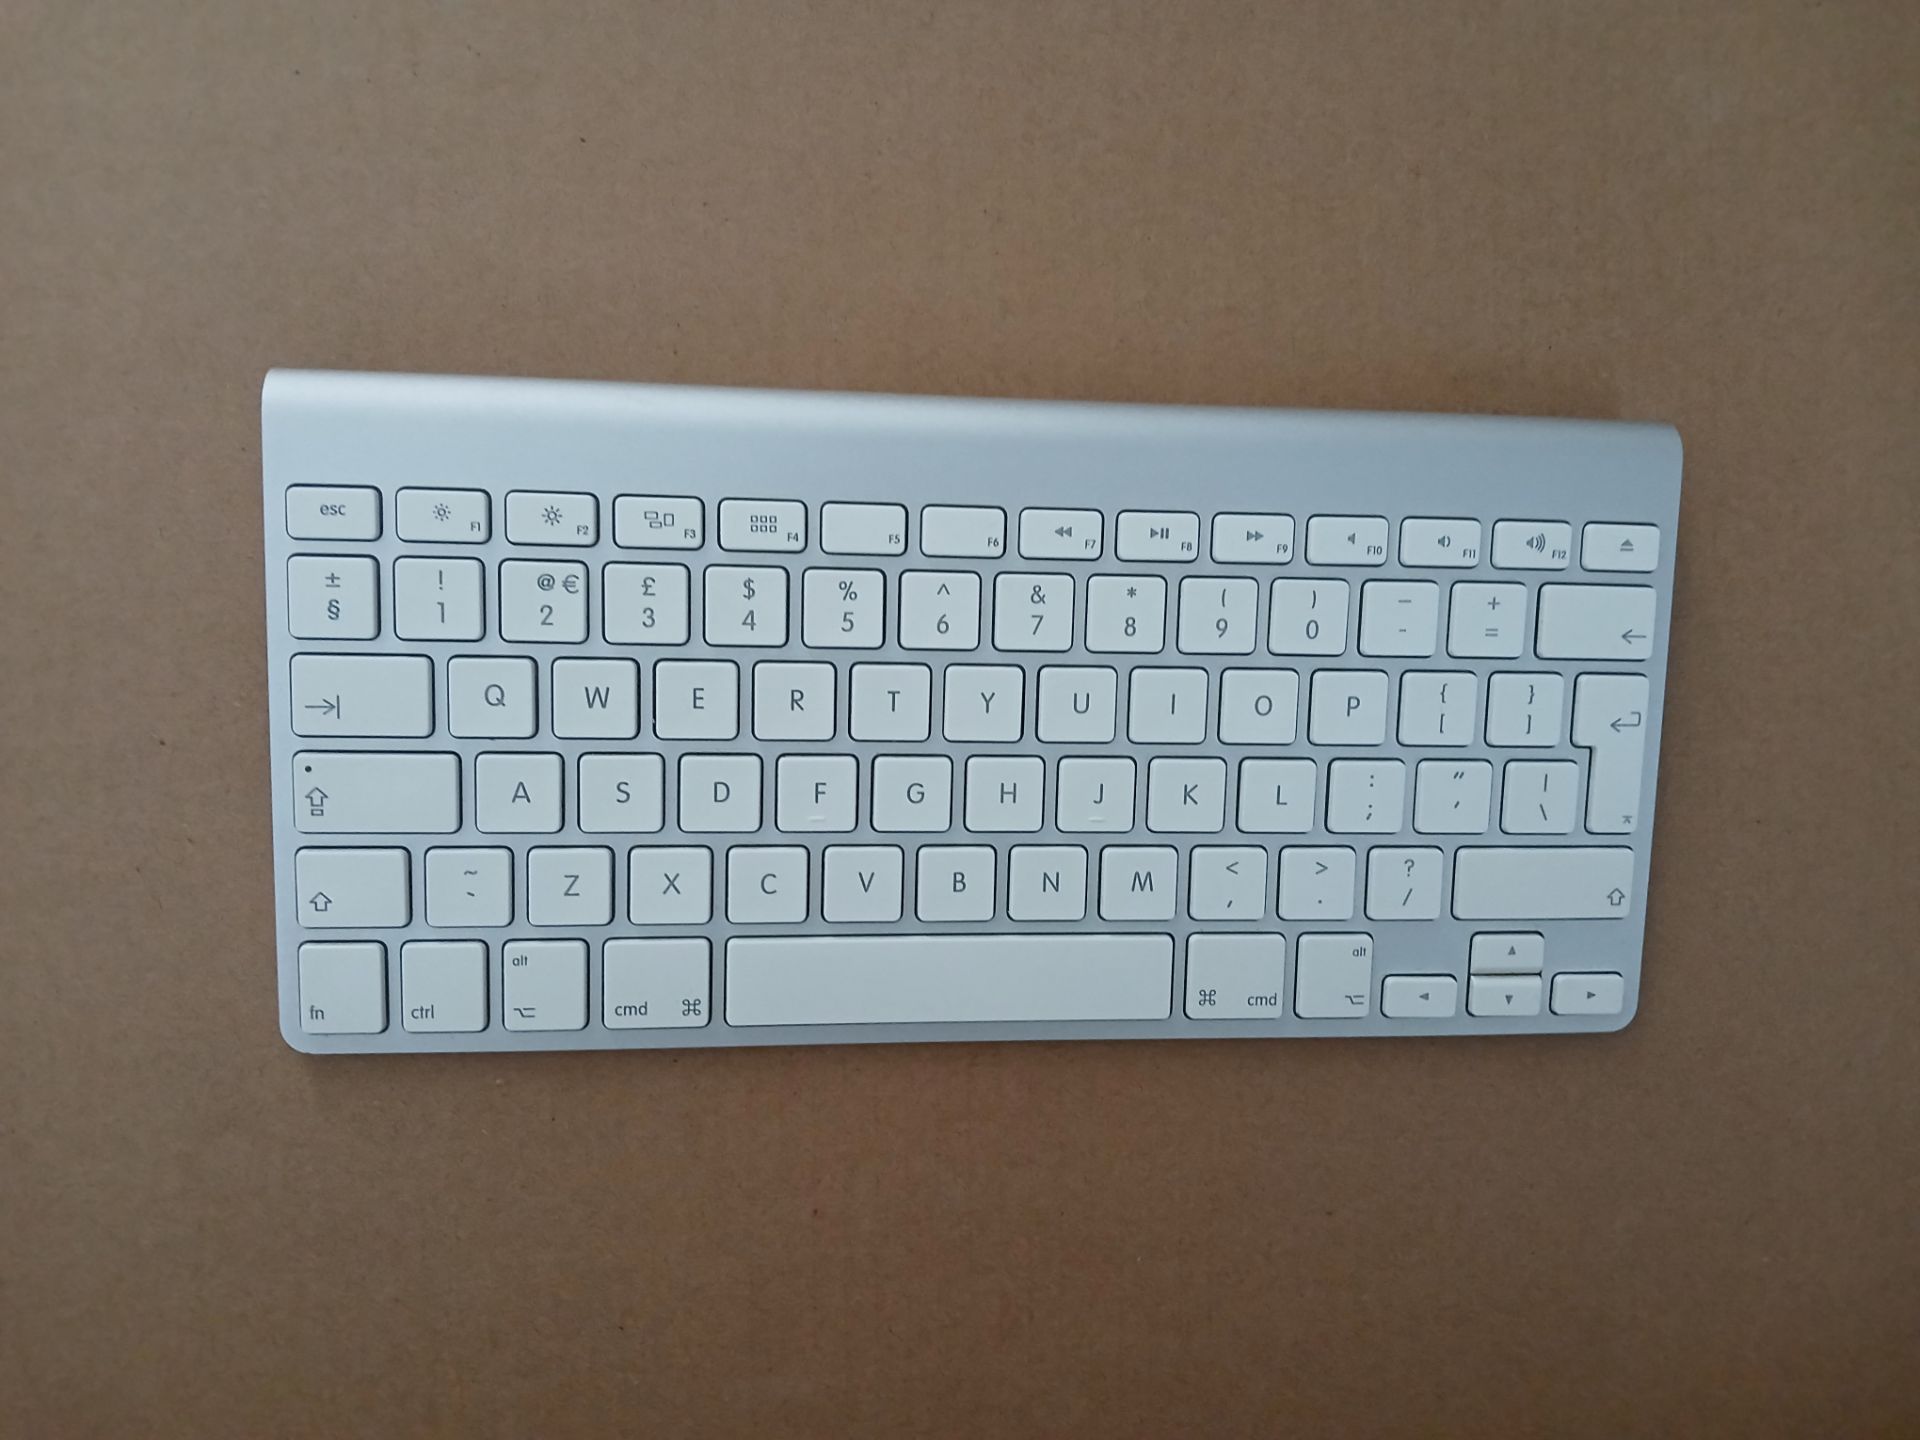 Apple iMac (Retina 5K, 27”, Mid 2015), Serial Number DGKQ306WFY13, with keyboard (No Mouse or - Image 12 of 14